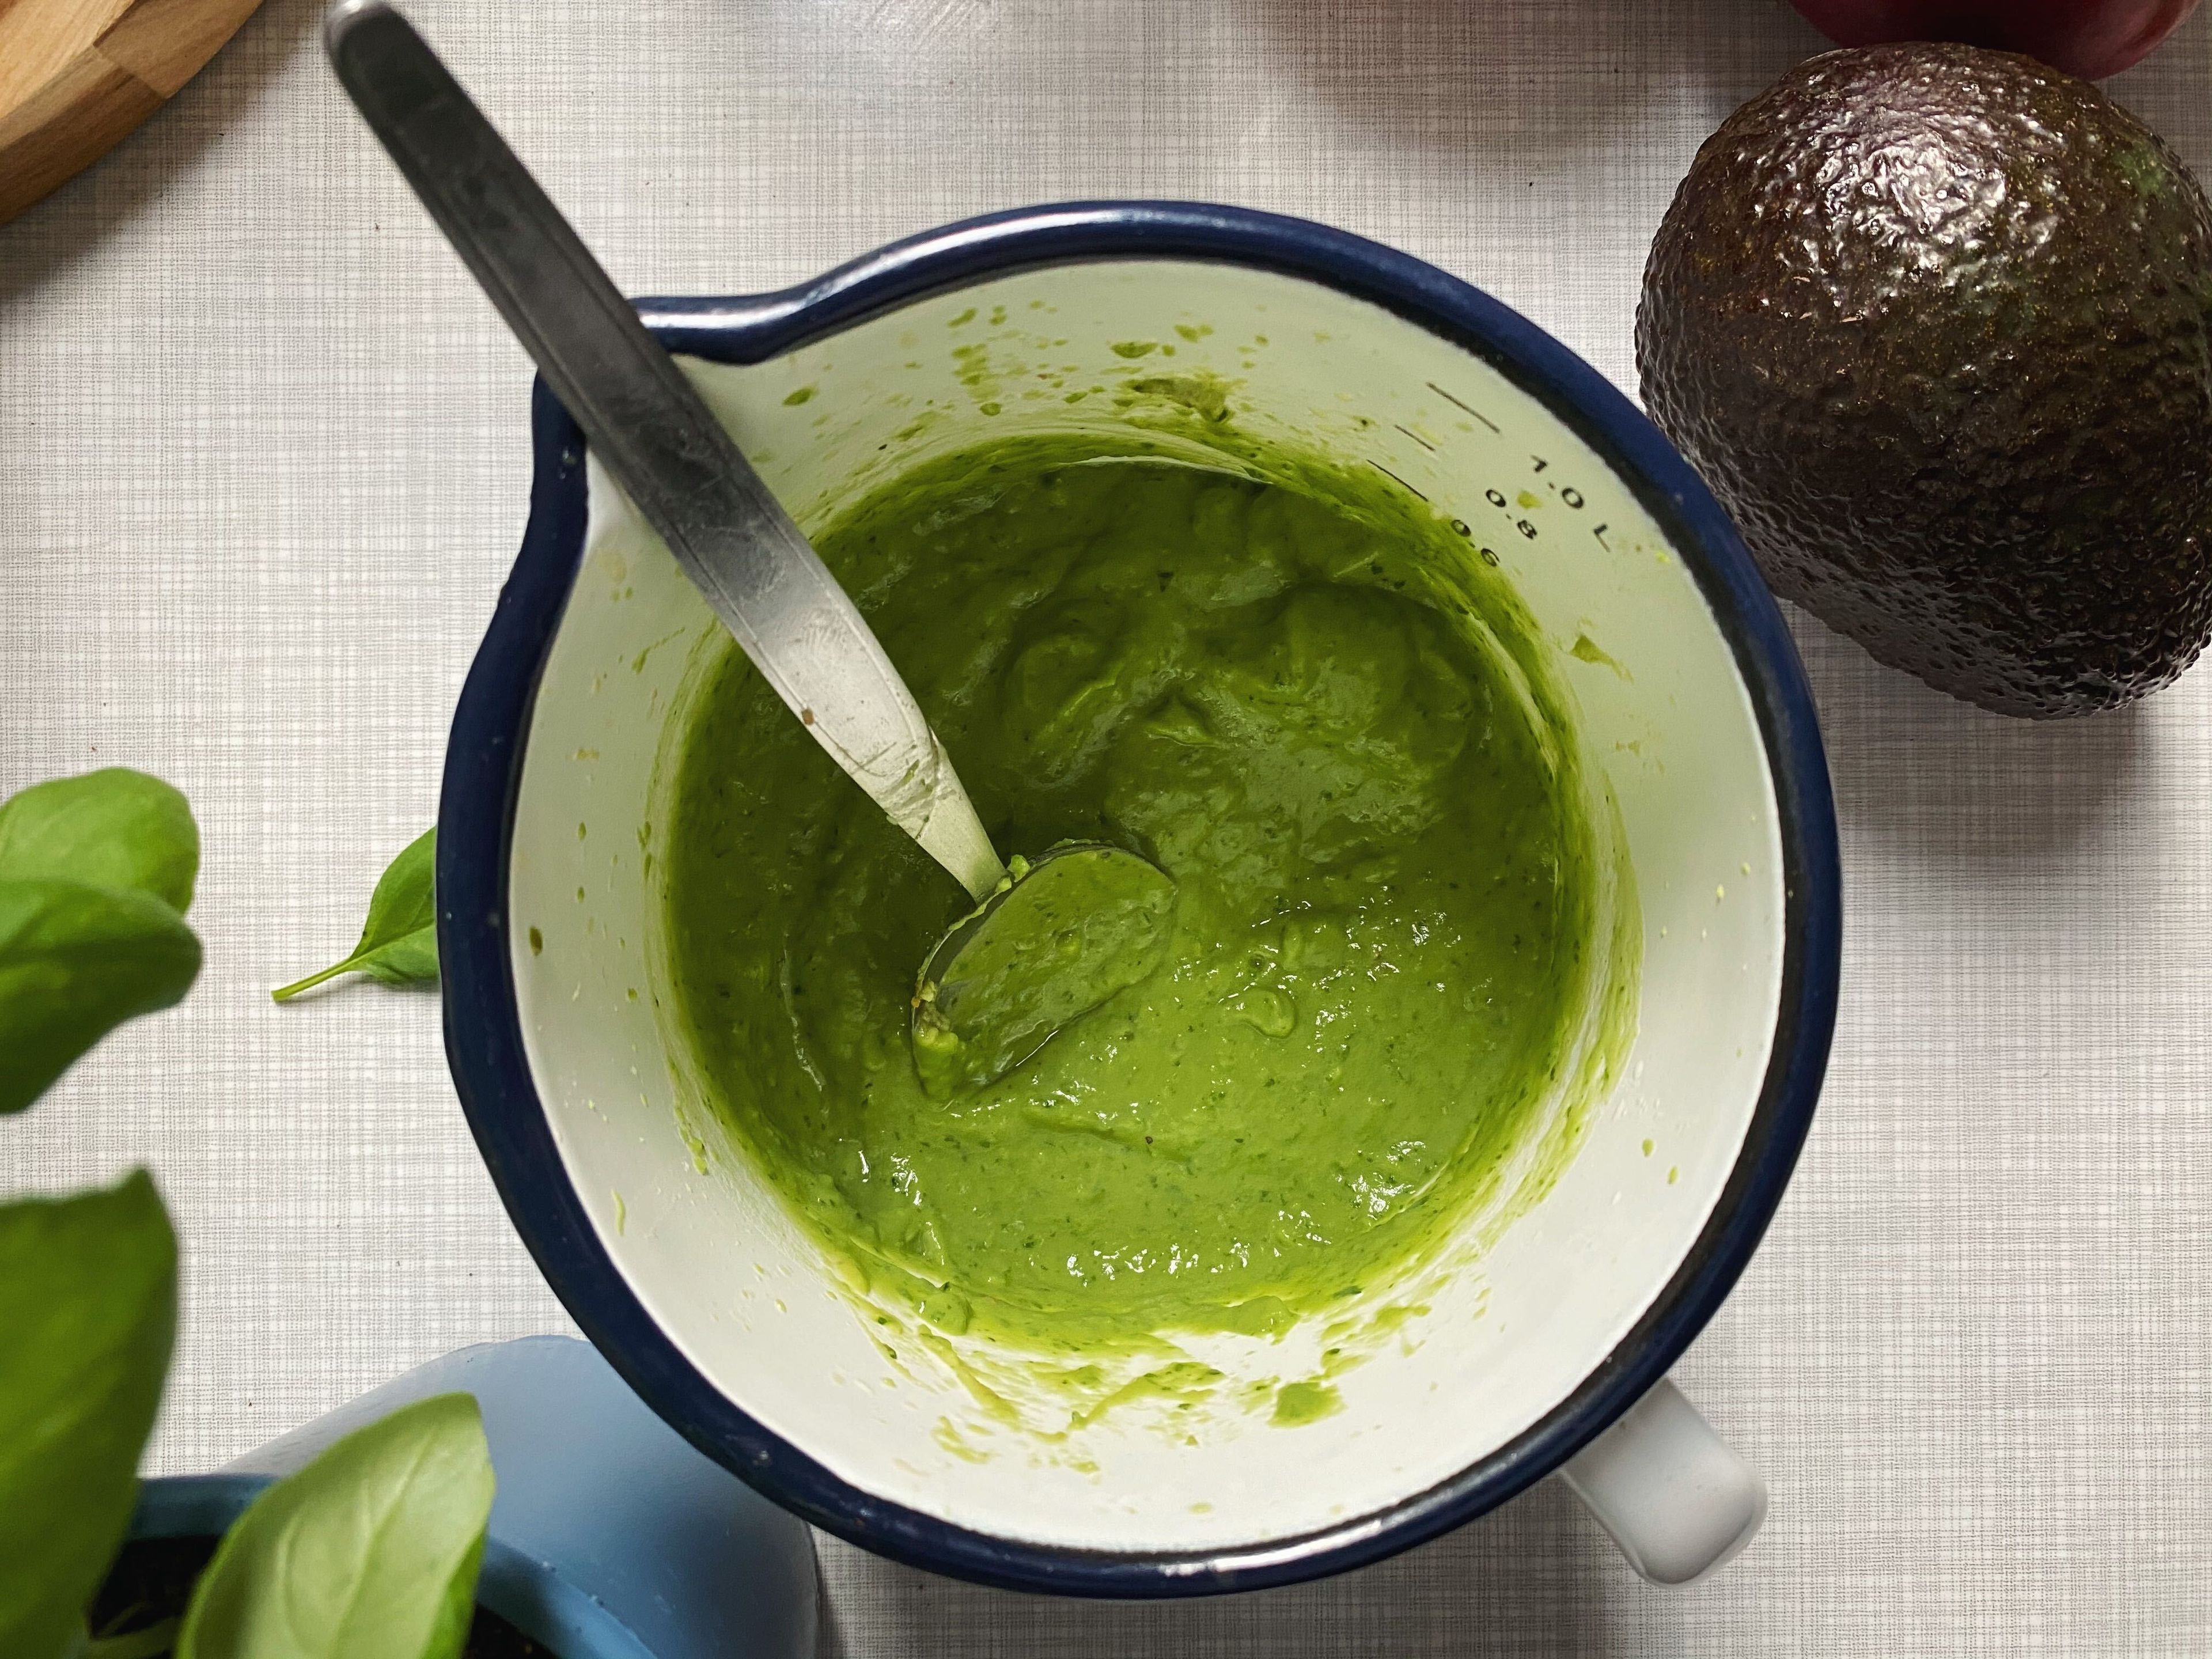 For the dressing, halve and pit avocado. Add the pulp, basil, olive oil, lime juice, and reserved pasta water to a large measuring cup. Use an immersion blender to blend until smooth. Season with salt and pepper to taste.